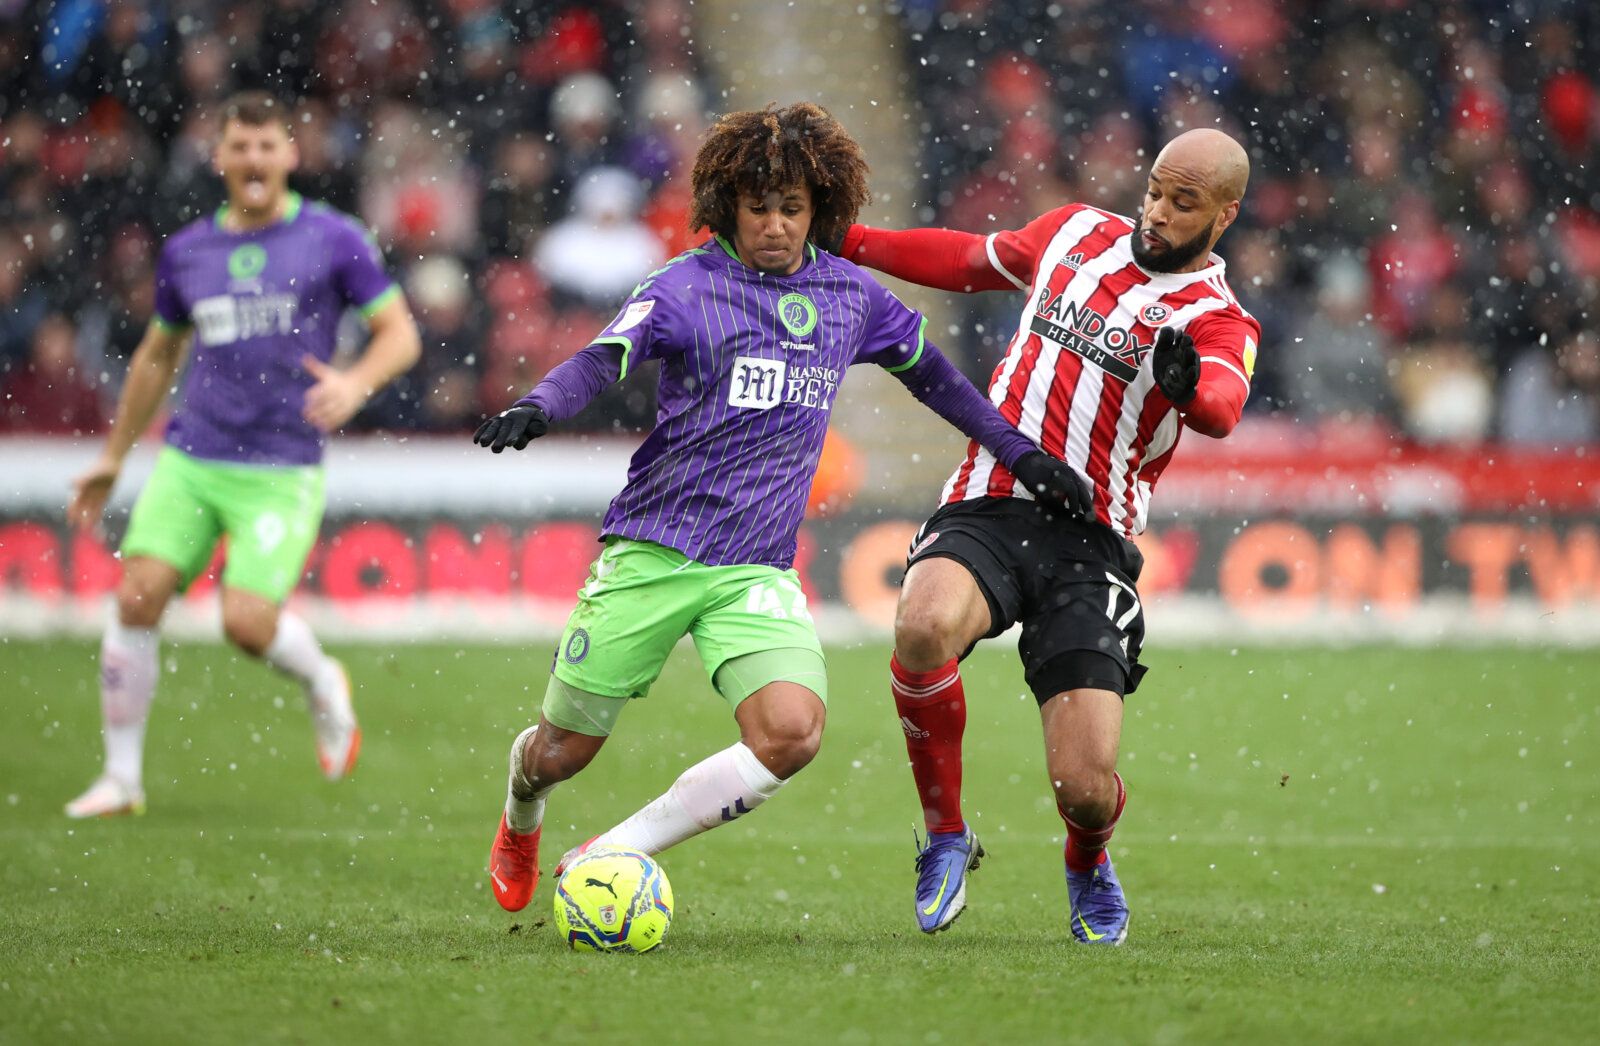 Soccer Football - Championship - Sheffield United v Bristol City - Bramall Lane, Sheffield, Britain - November 28, 2021 Bristol City's Han-Noah Massengo in action with Sheffield United's David McGoldrick Action Images/Molly Darlington EDITORIAL USE ONLY. No use with unauthorized audio, video, data, fixture lists, club/league logos or 'live' services. Online in-match use limited to 75 images, no video emulation. No use in betting, games or single club /league/player publications.  Please contact 